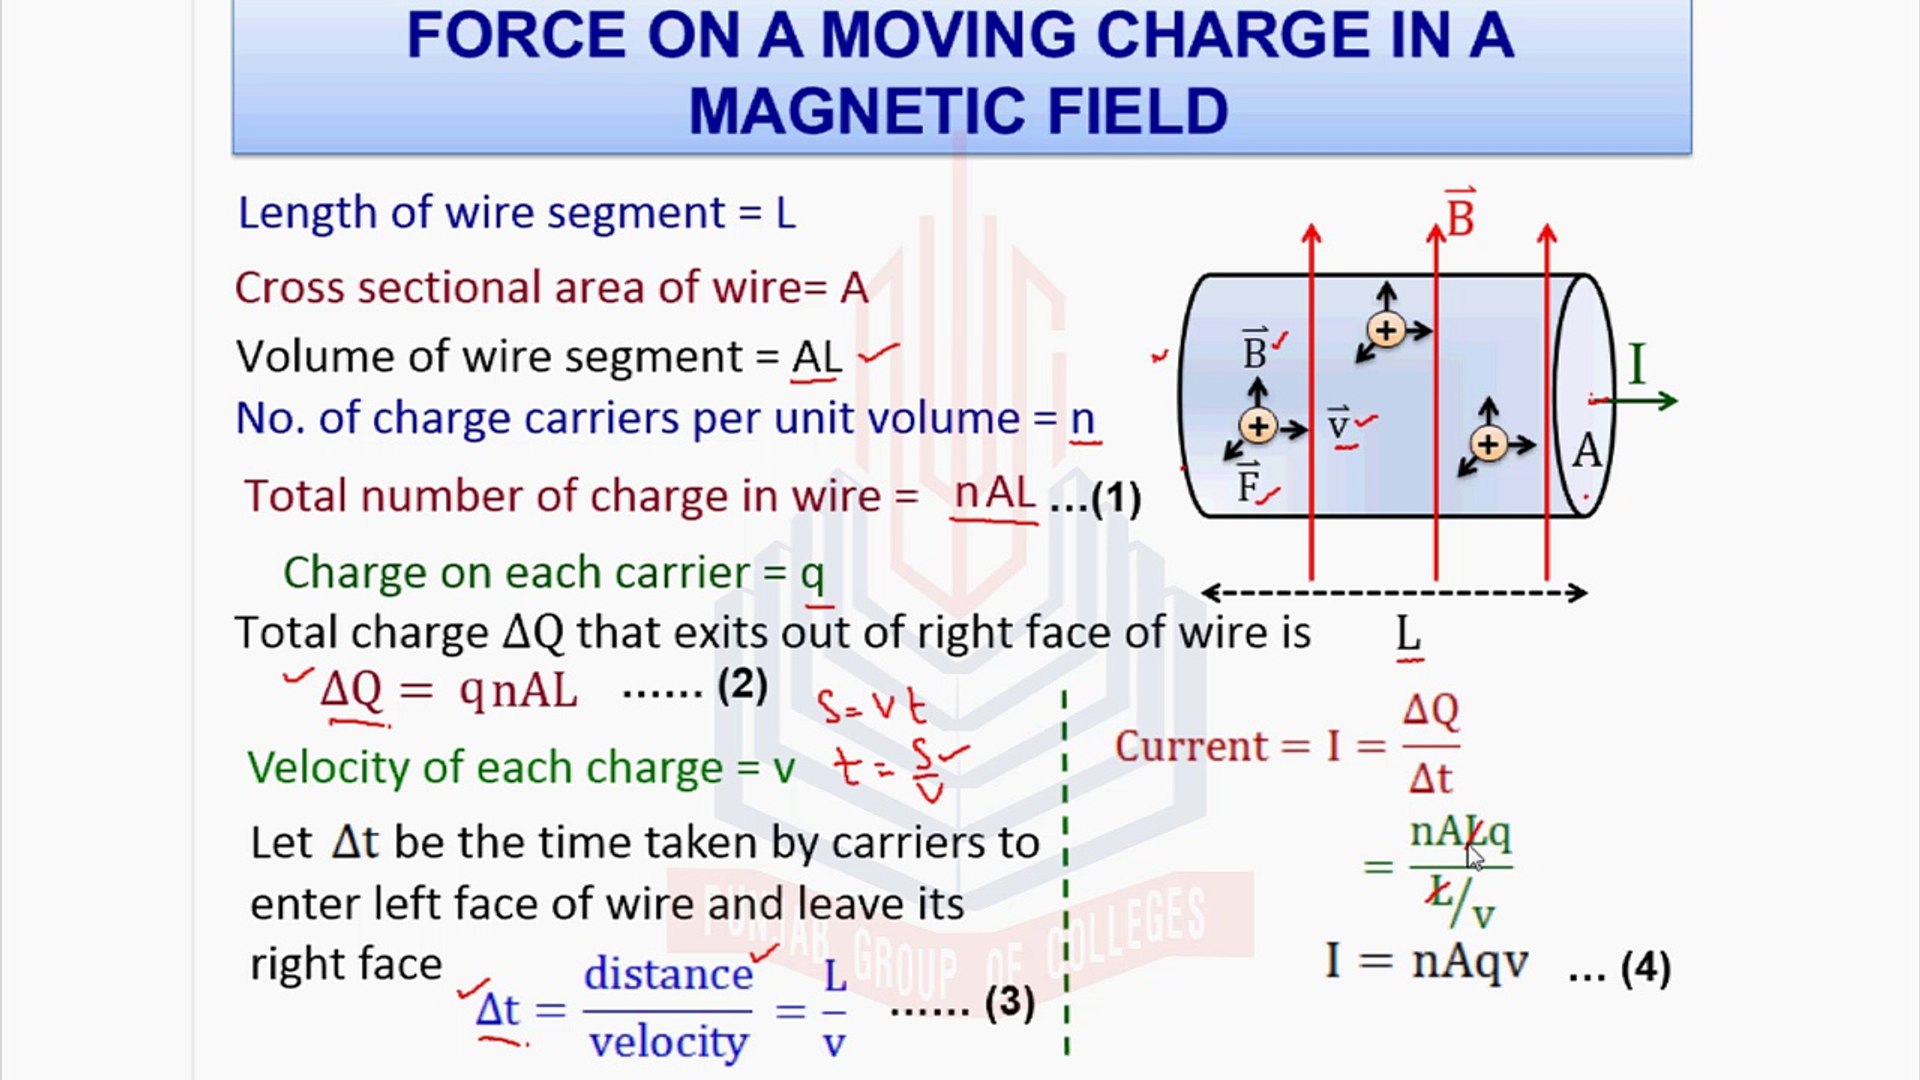 on a moving charge in a magnetic field - Dailymotion